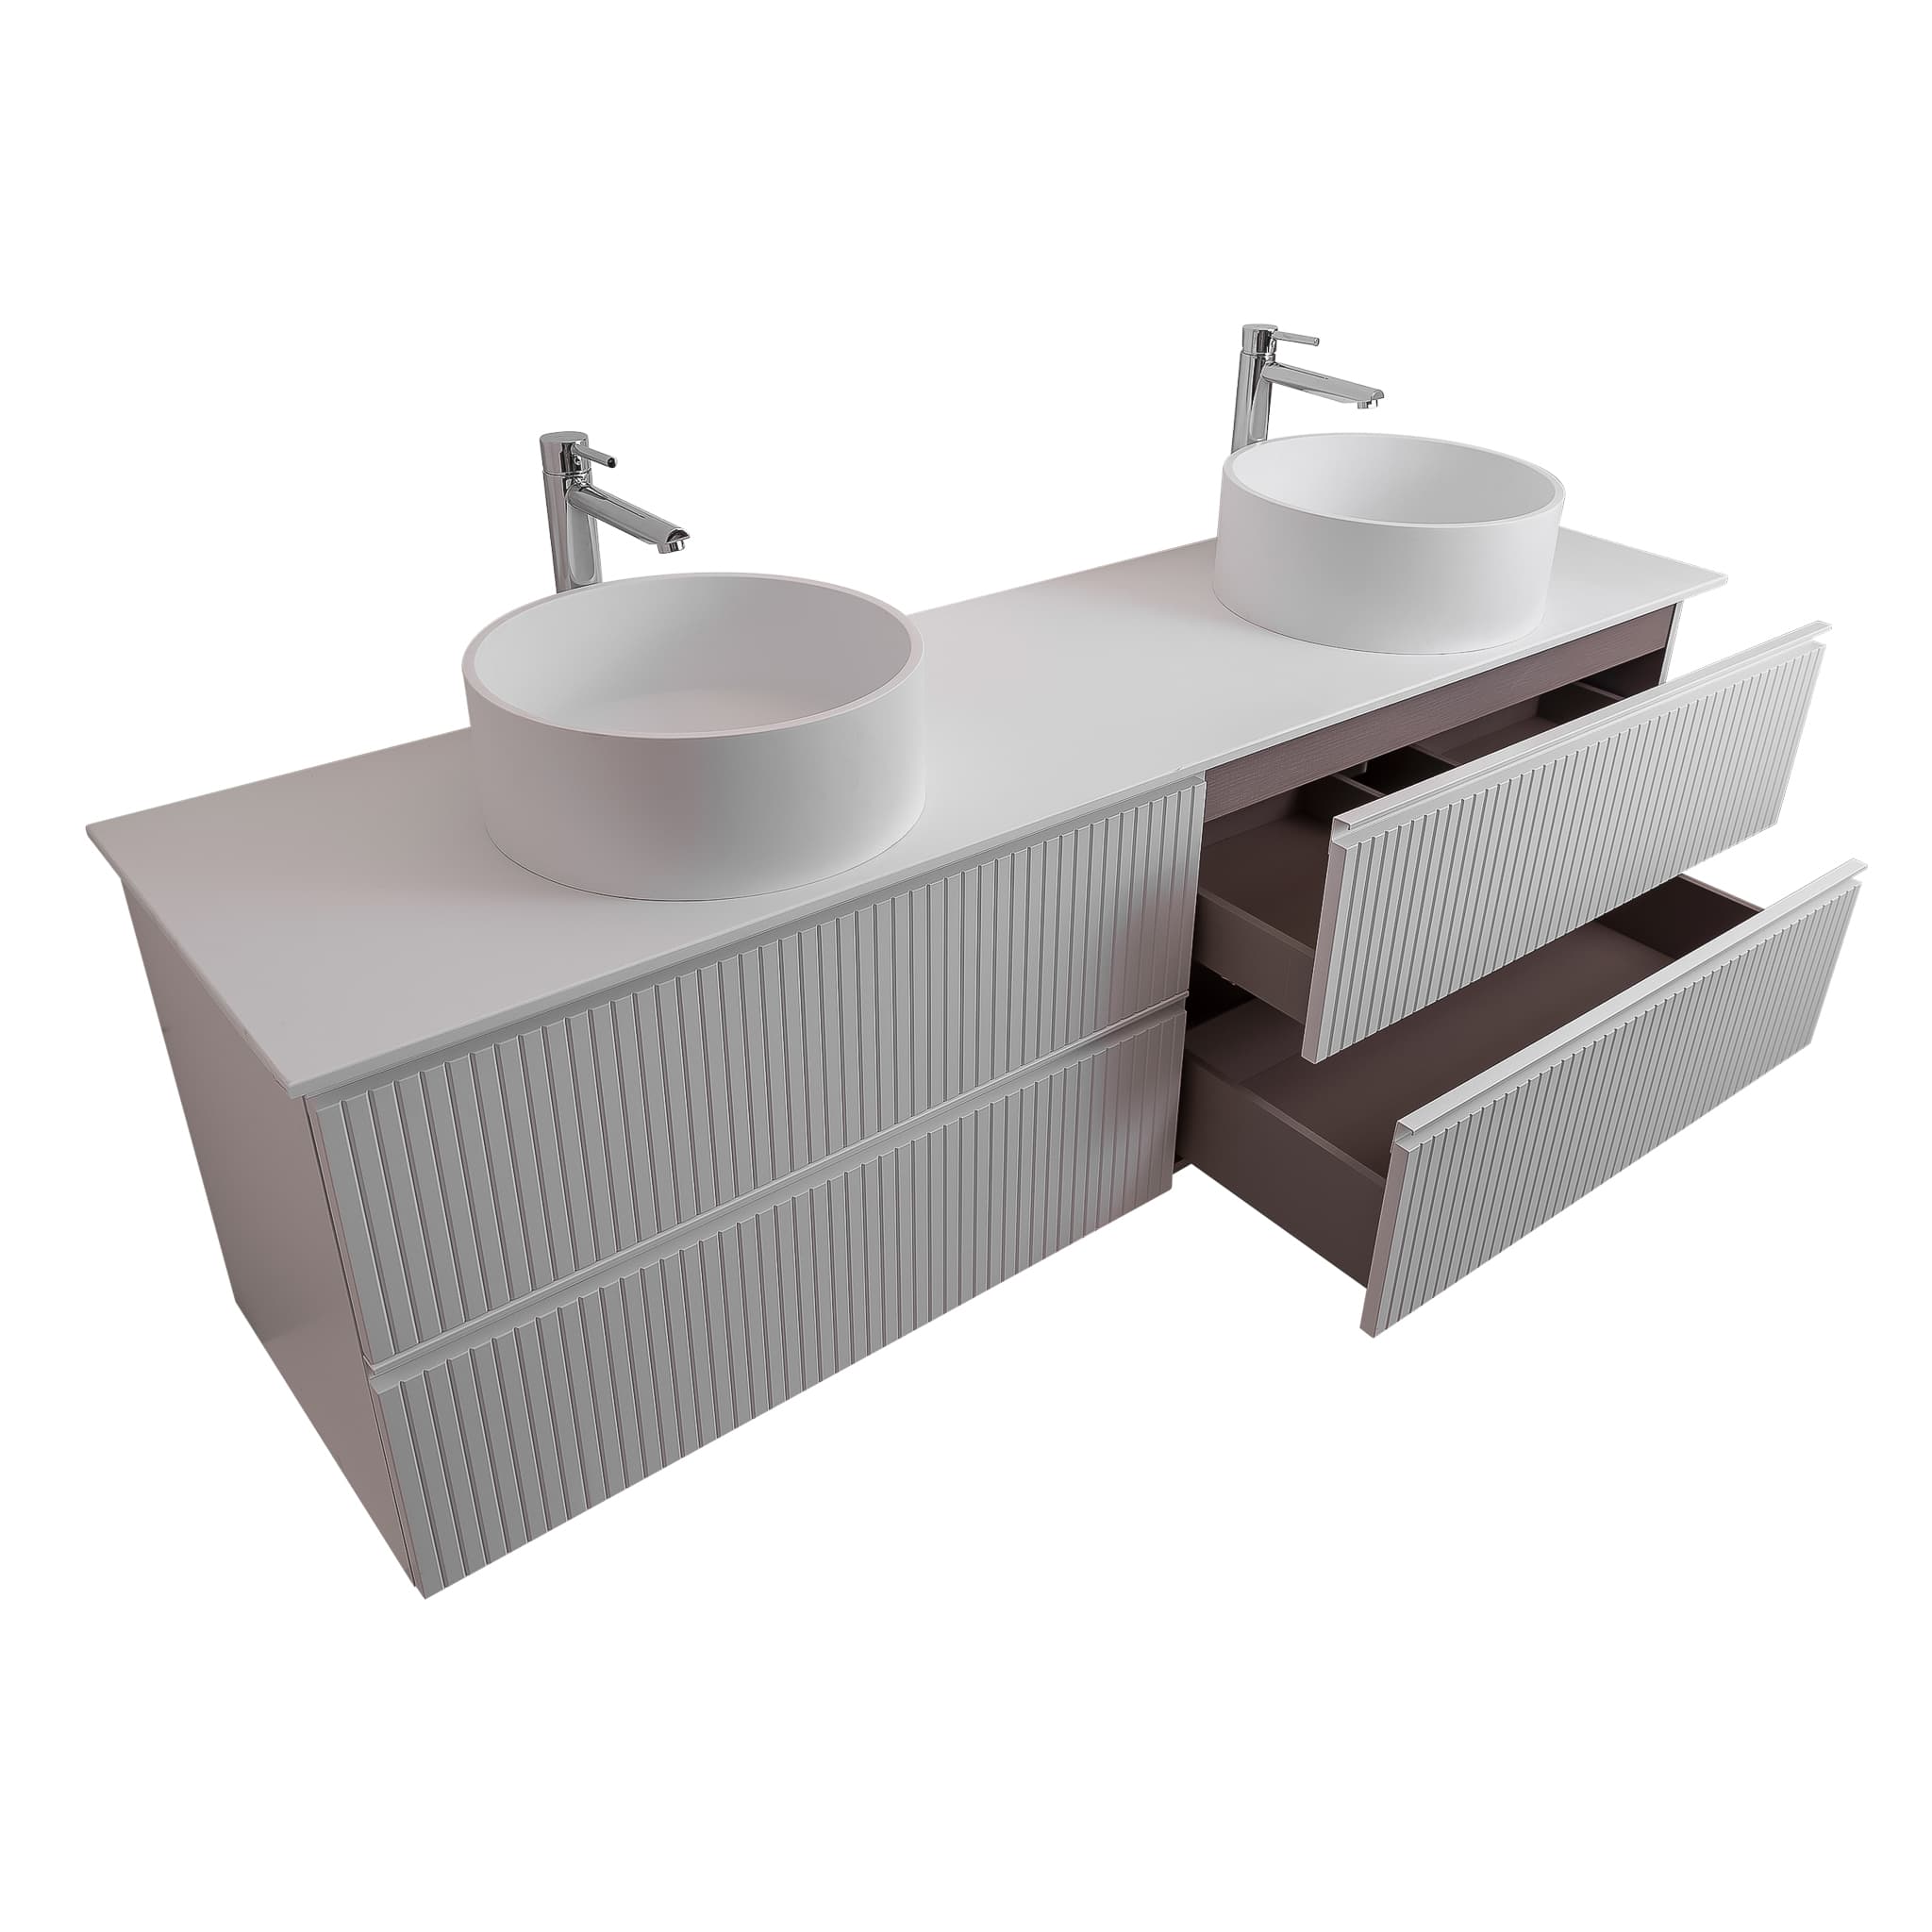 Ares 72 Matte White Cabinet, Solid Surface Flat White Counter And Two Round Solid Surface White Basin 1386, Wall Mounted Modern Vanity Set